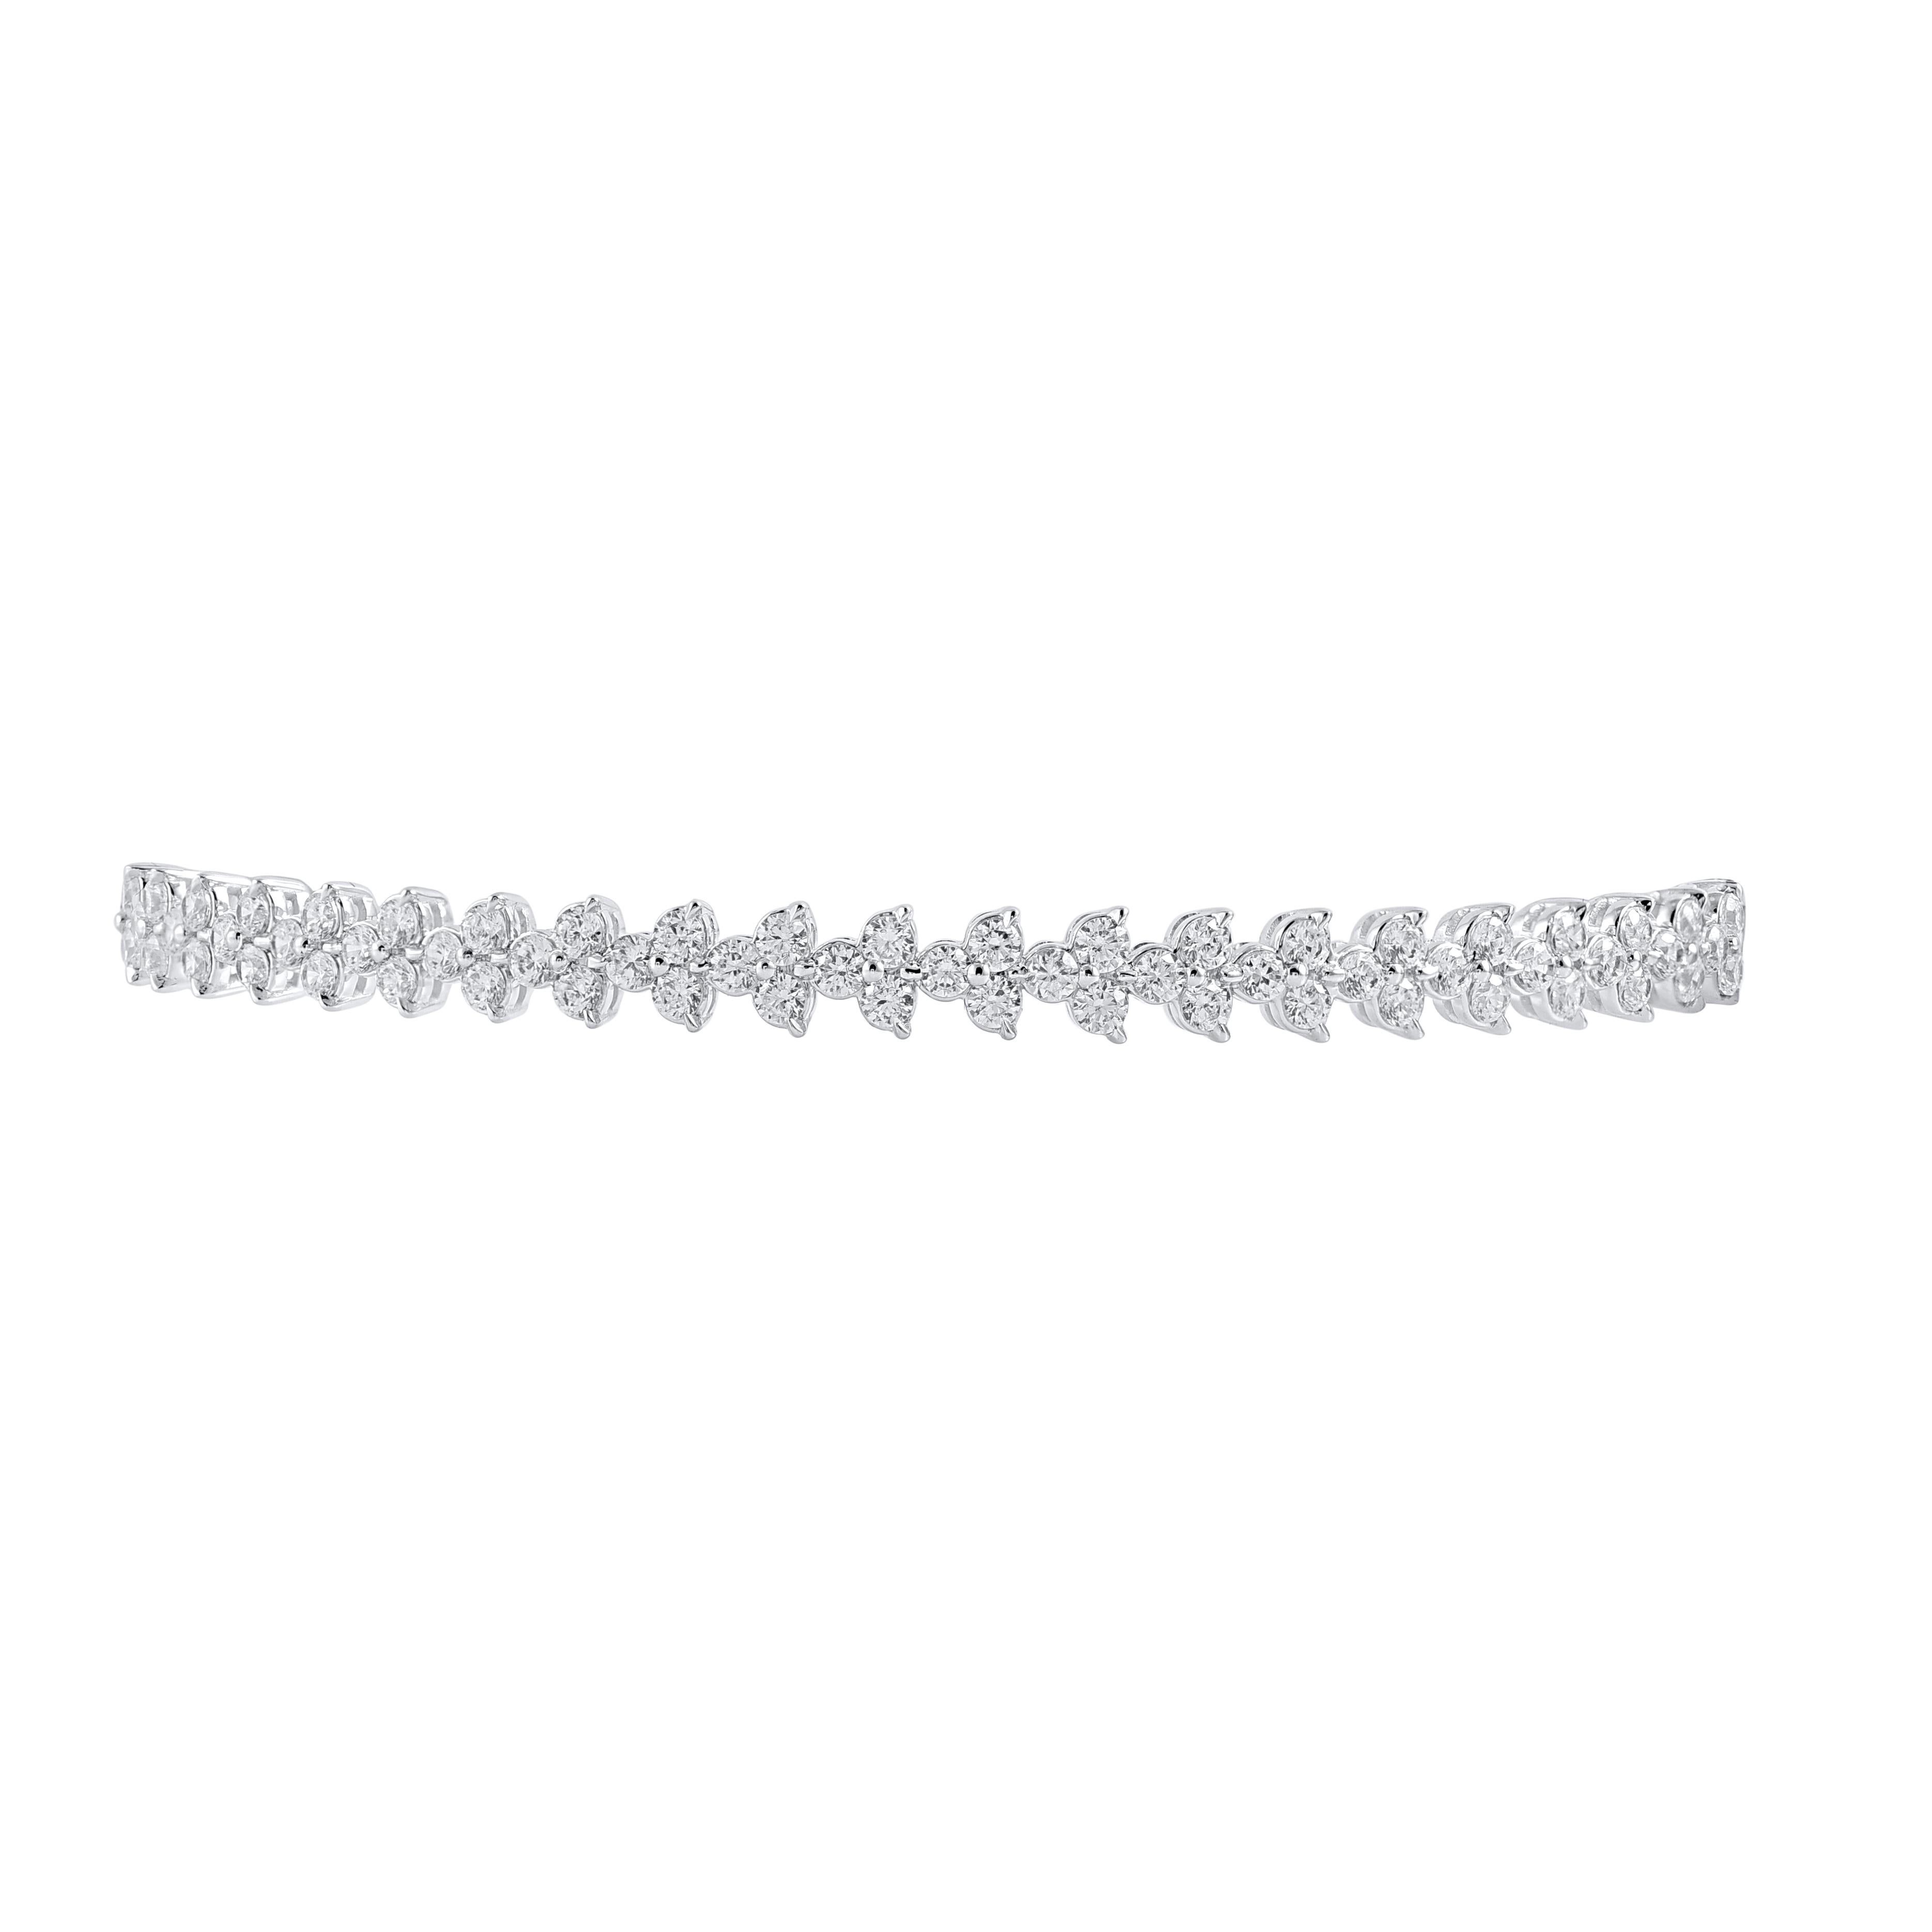 Achieve a most elegant look with the enchanting diamond bangle bracelet. This Shimmering bangle bracelet features 63 natural round brilliant cut diamonds in prong setting and crafted in 14kt white gold. Diamonds are graded H-I color, I-2 clarity.

